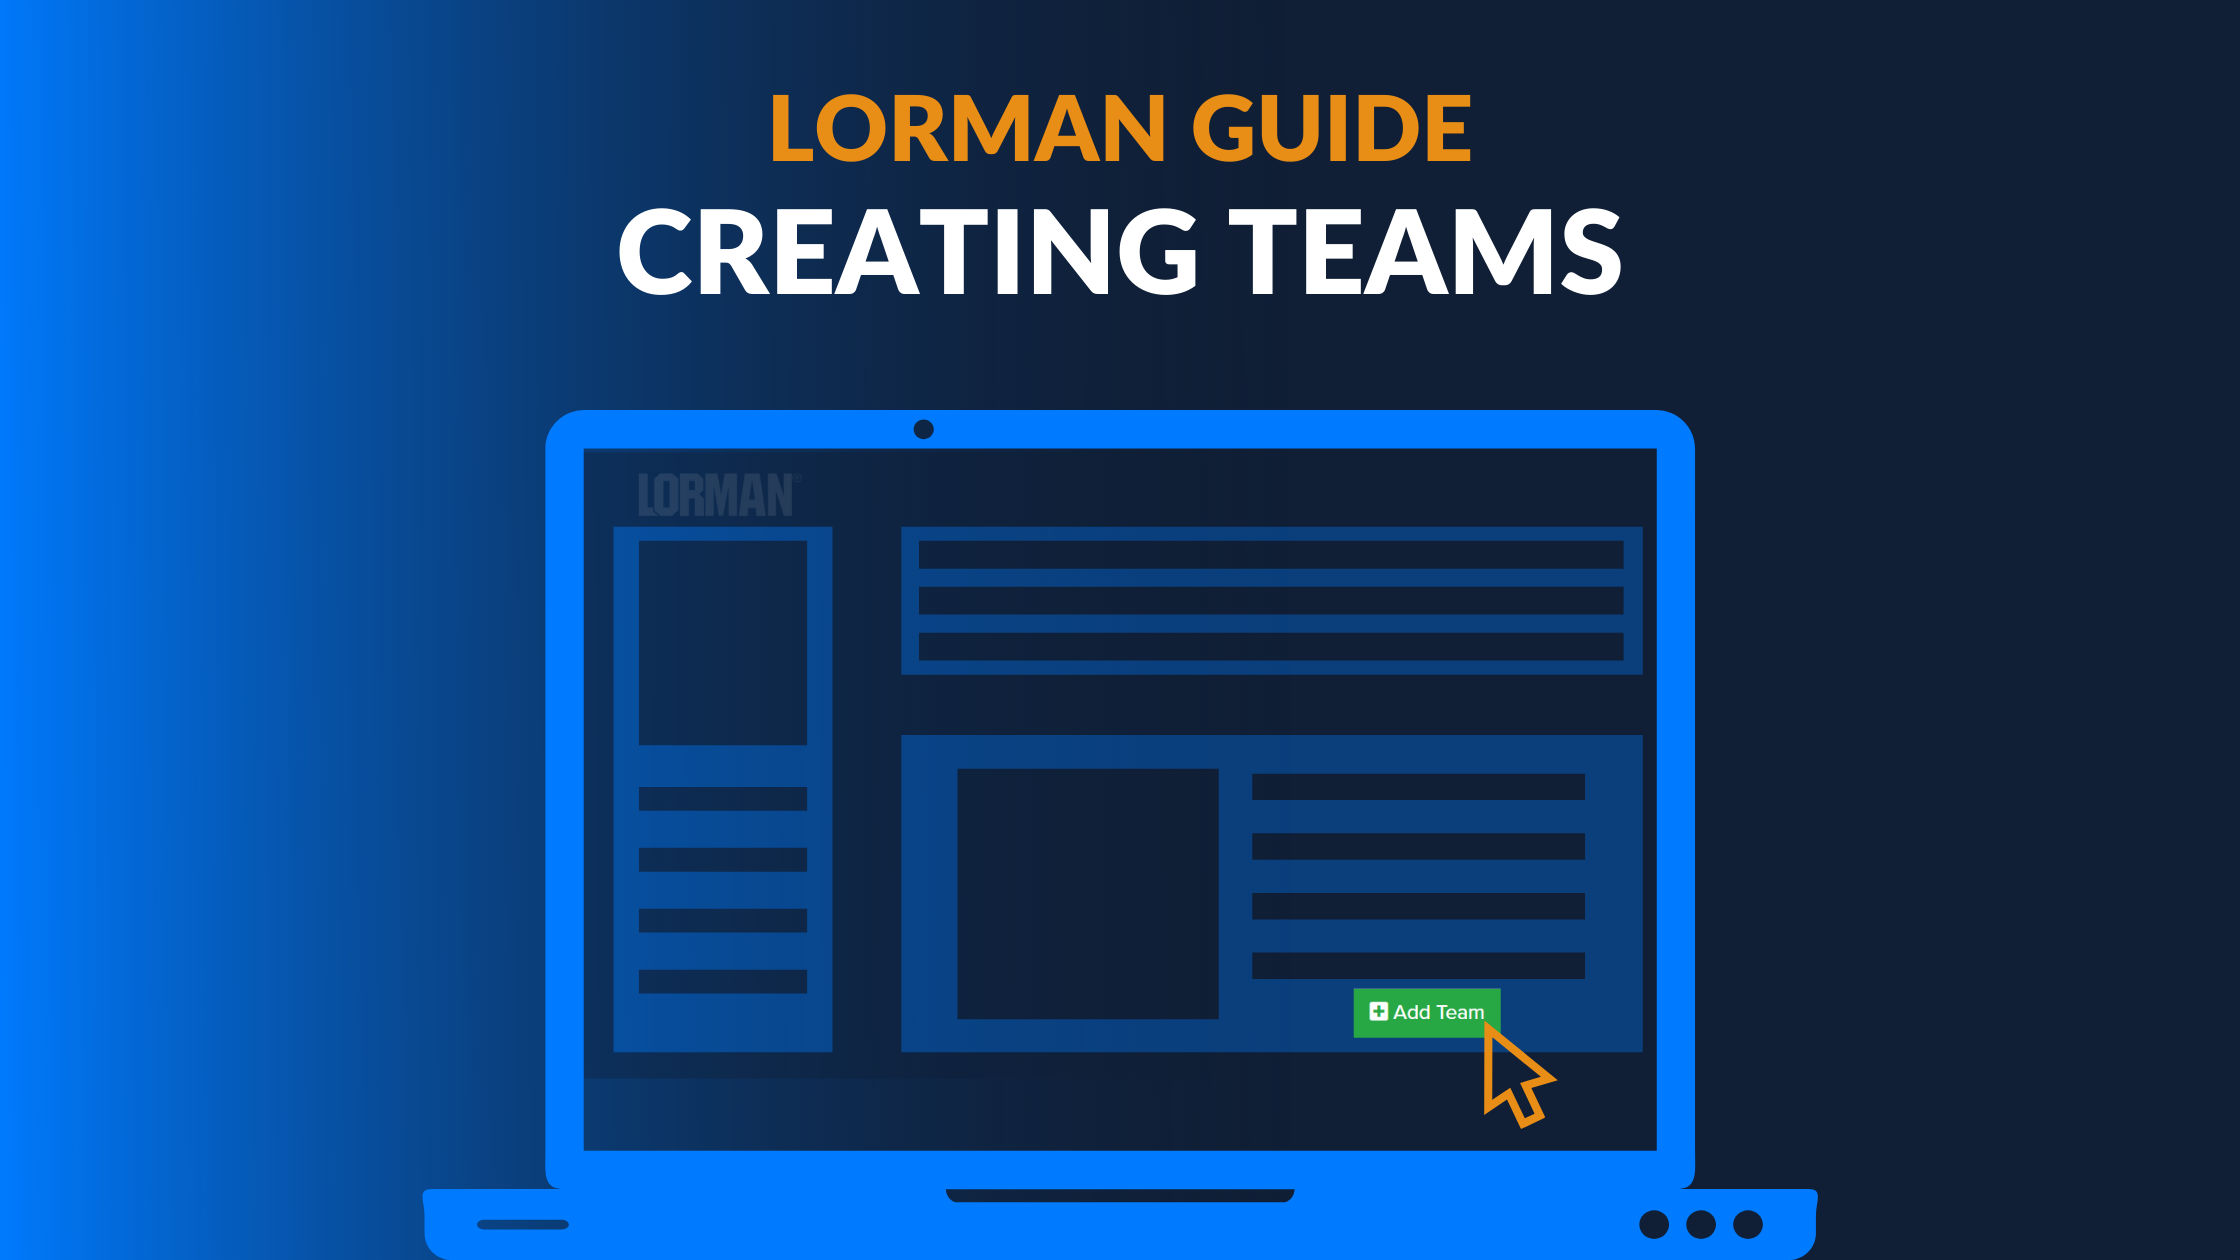 Lorman Guide: How to Create Teams for Your Company